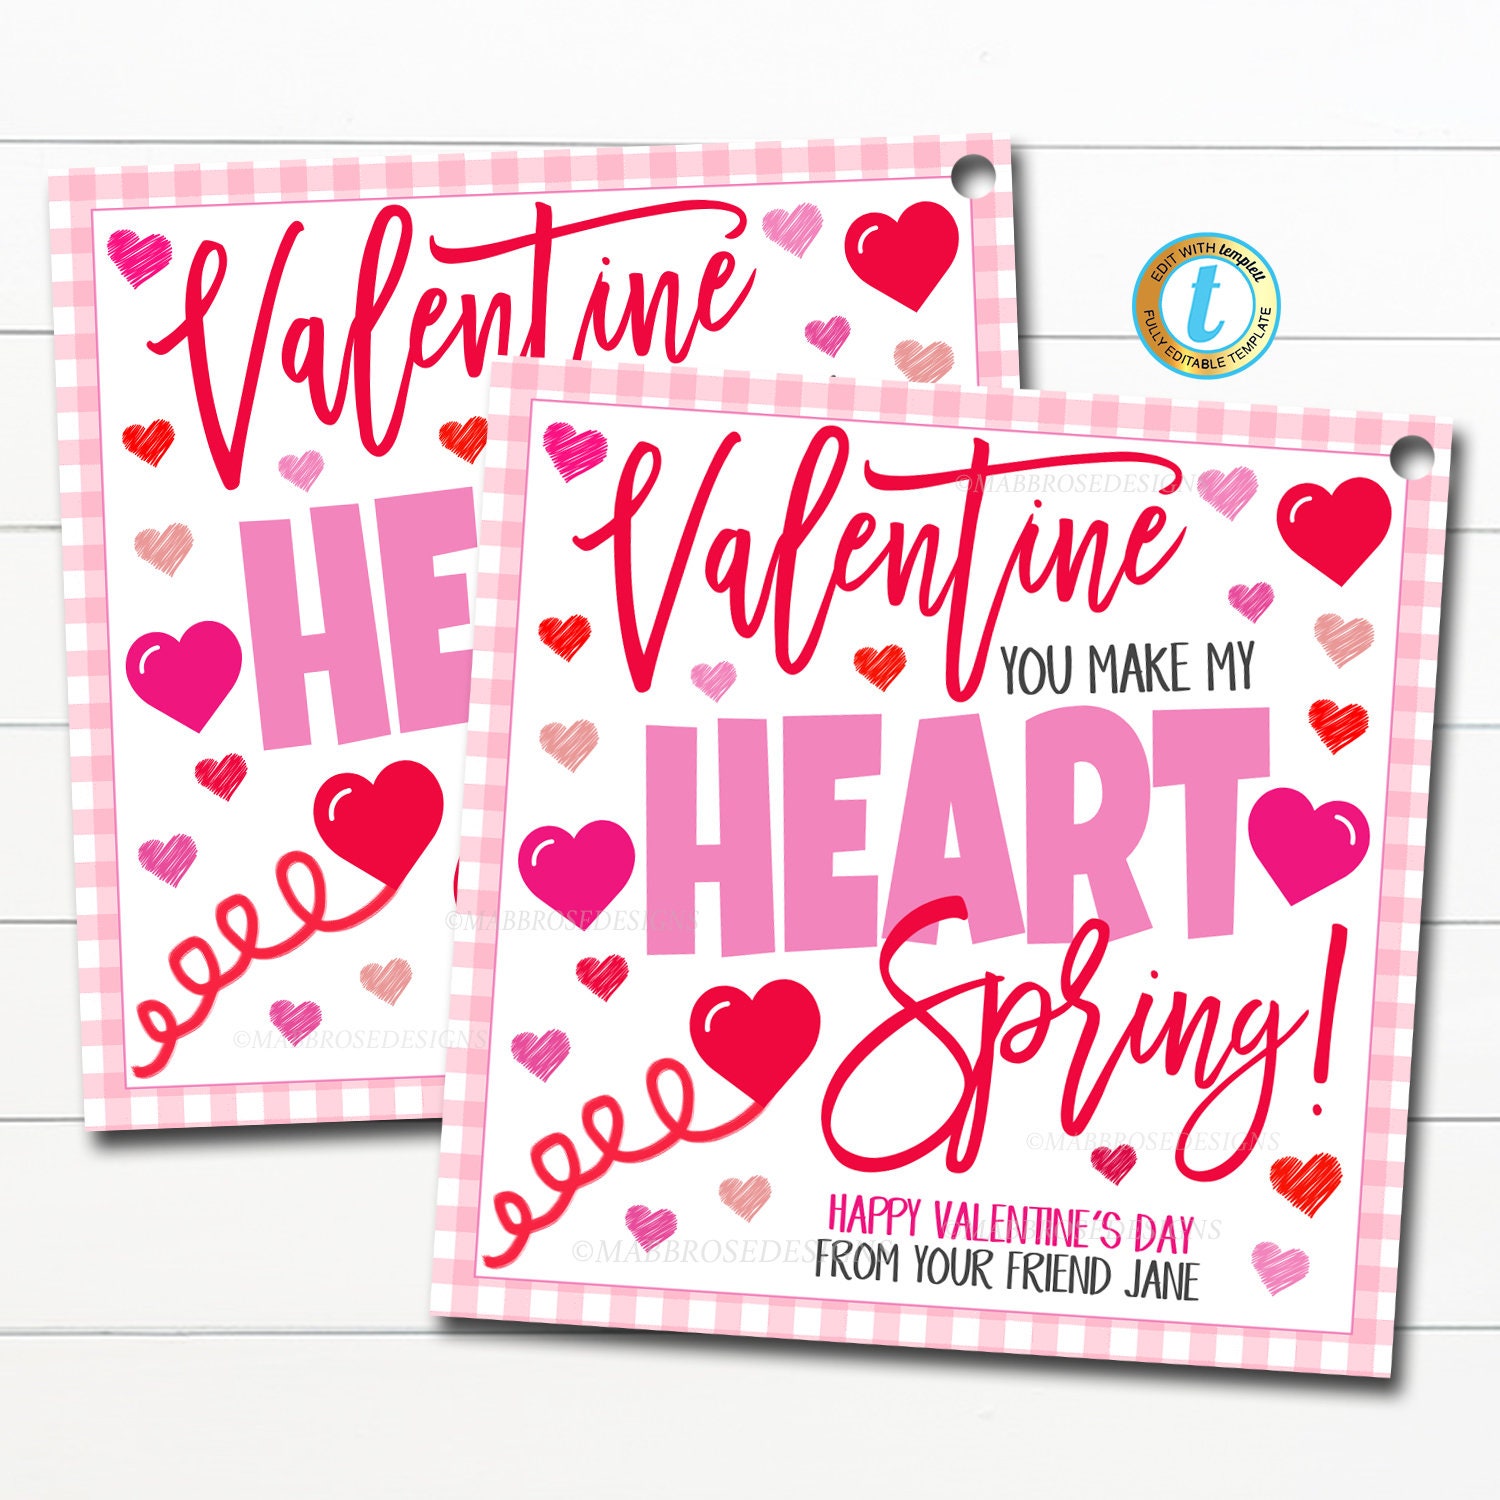 Sticky Hand Valentine Cards High Five Valentines to Match Sticky Hands Toy  for School Class Instant Digital Download or Mailed 